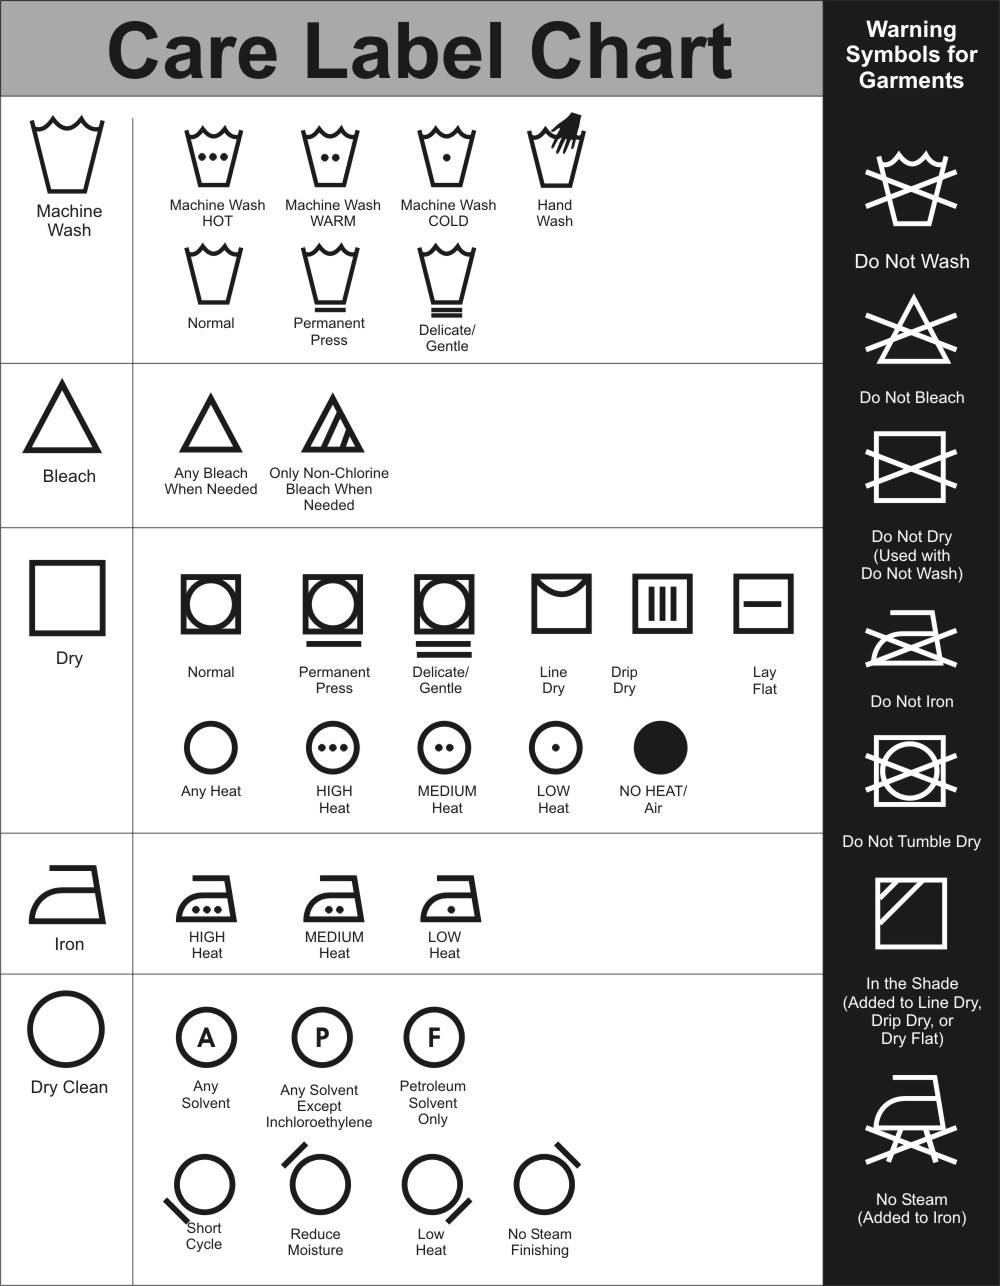 When it comes to caring for our clothes, it can be challenging to know what each laundry care label symbol on our clothes means. Ignoring these symbols can lead to shrinkage, fading or even damage to the fabric. Therefore, it is essential to learn how to decipher these symbols to extend the lifespan of our clothes and maintain their appearance.